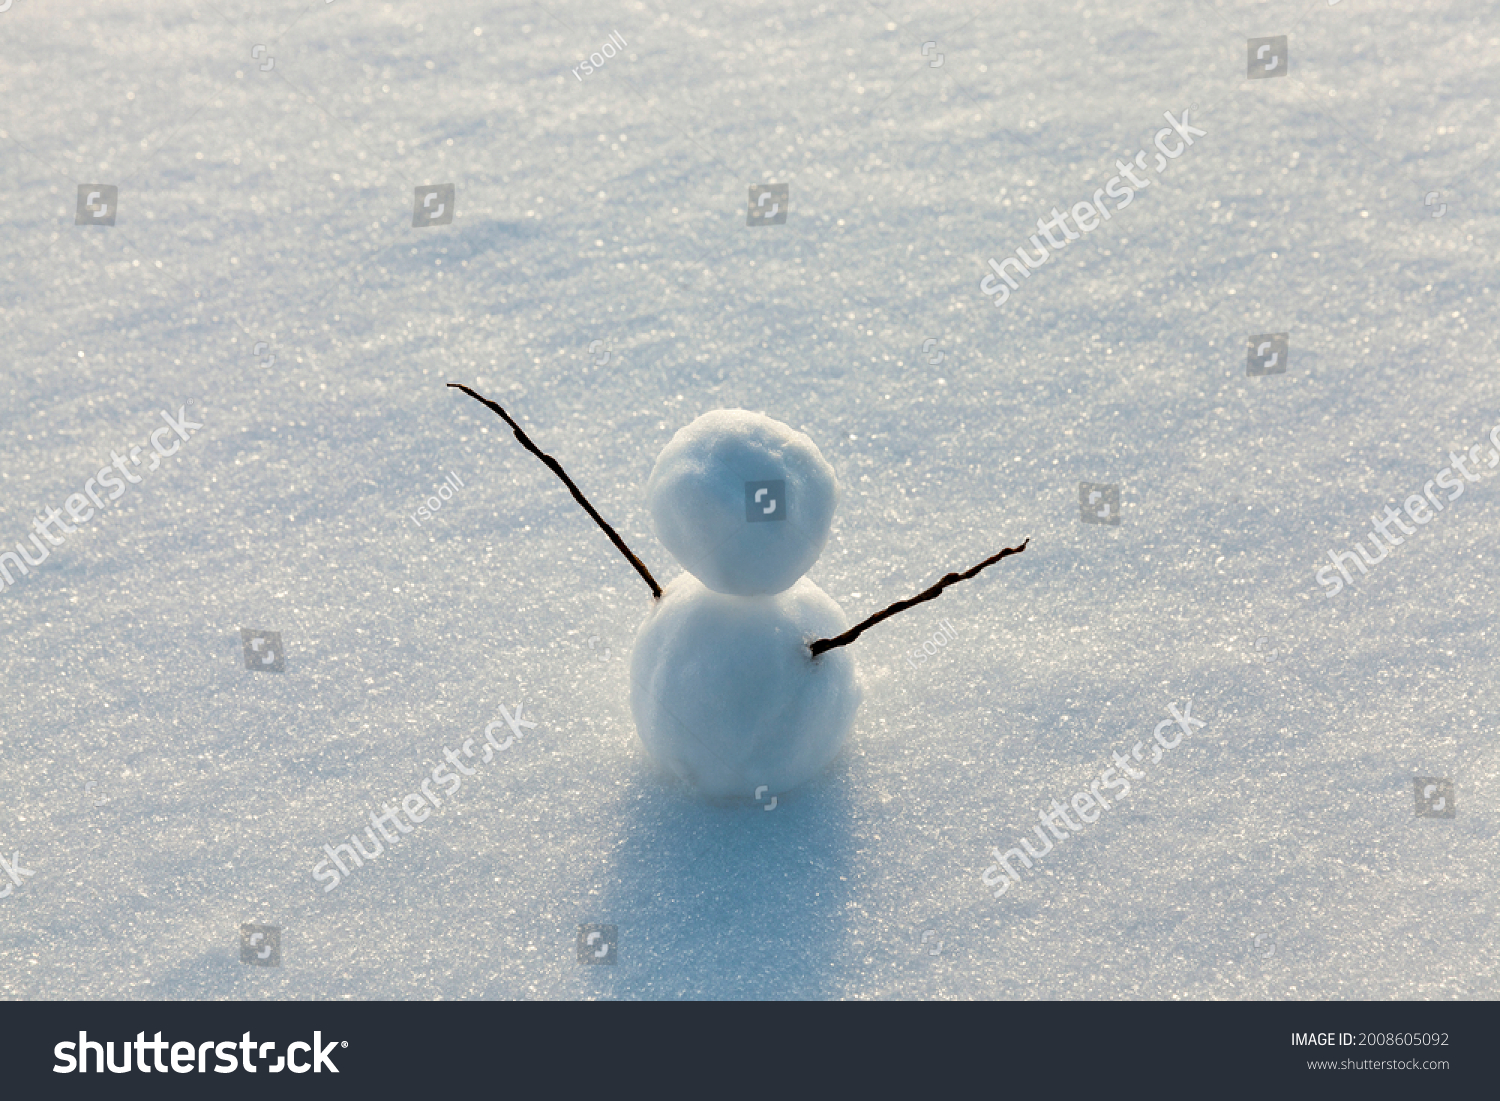 the snowman is made of several parts and stands in the snow in cold weather, one small snowman in the winter season, snow games with the creation of one snowman figure #2008605092